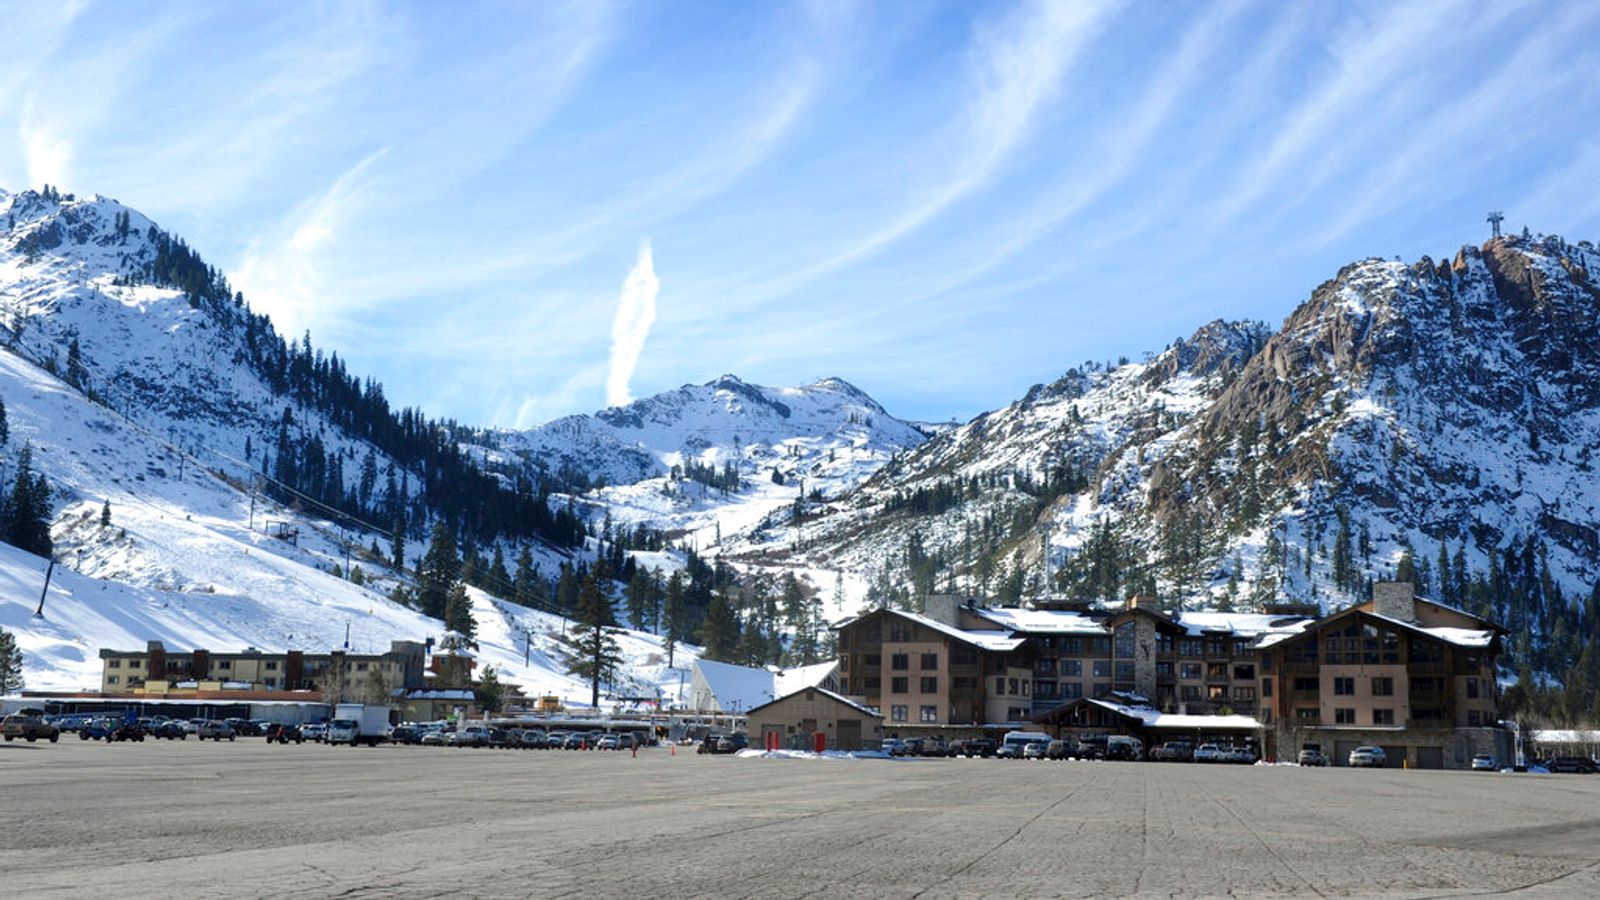 US weather: One dead and another injured after avalanche at California ski resort